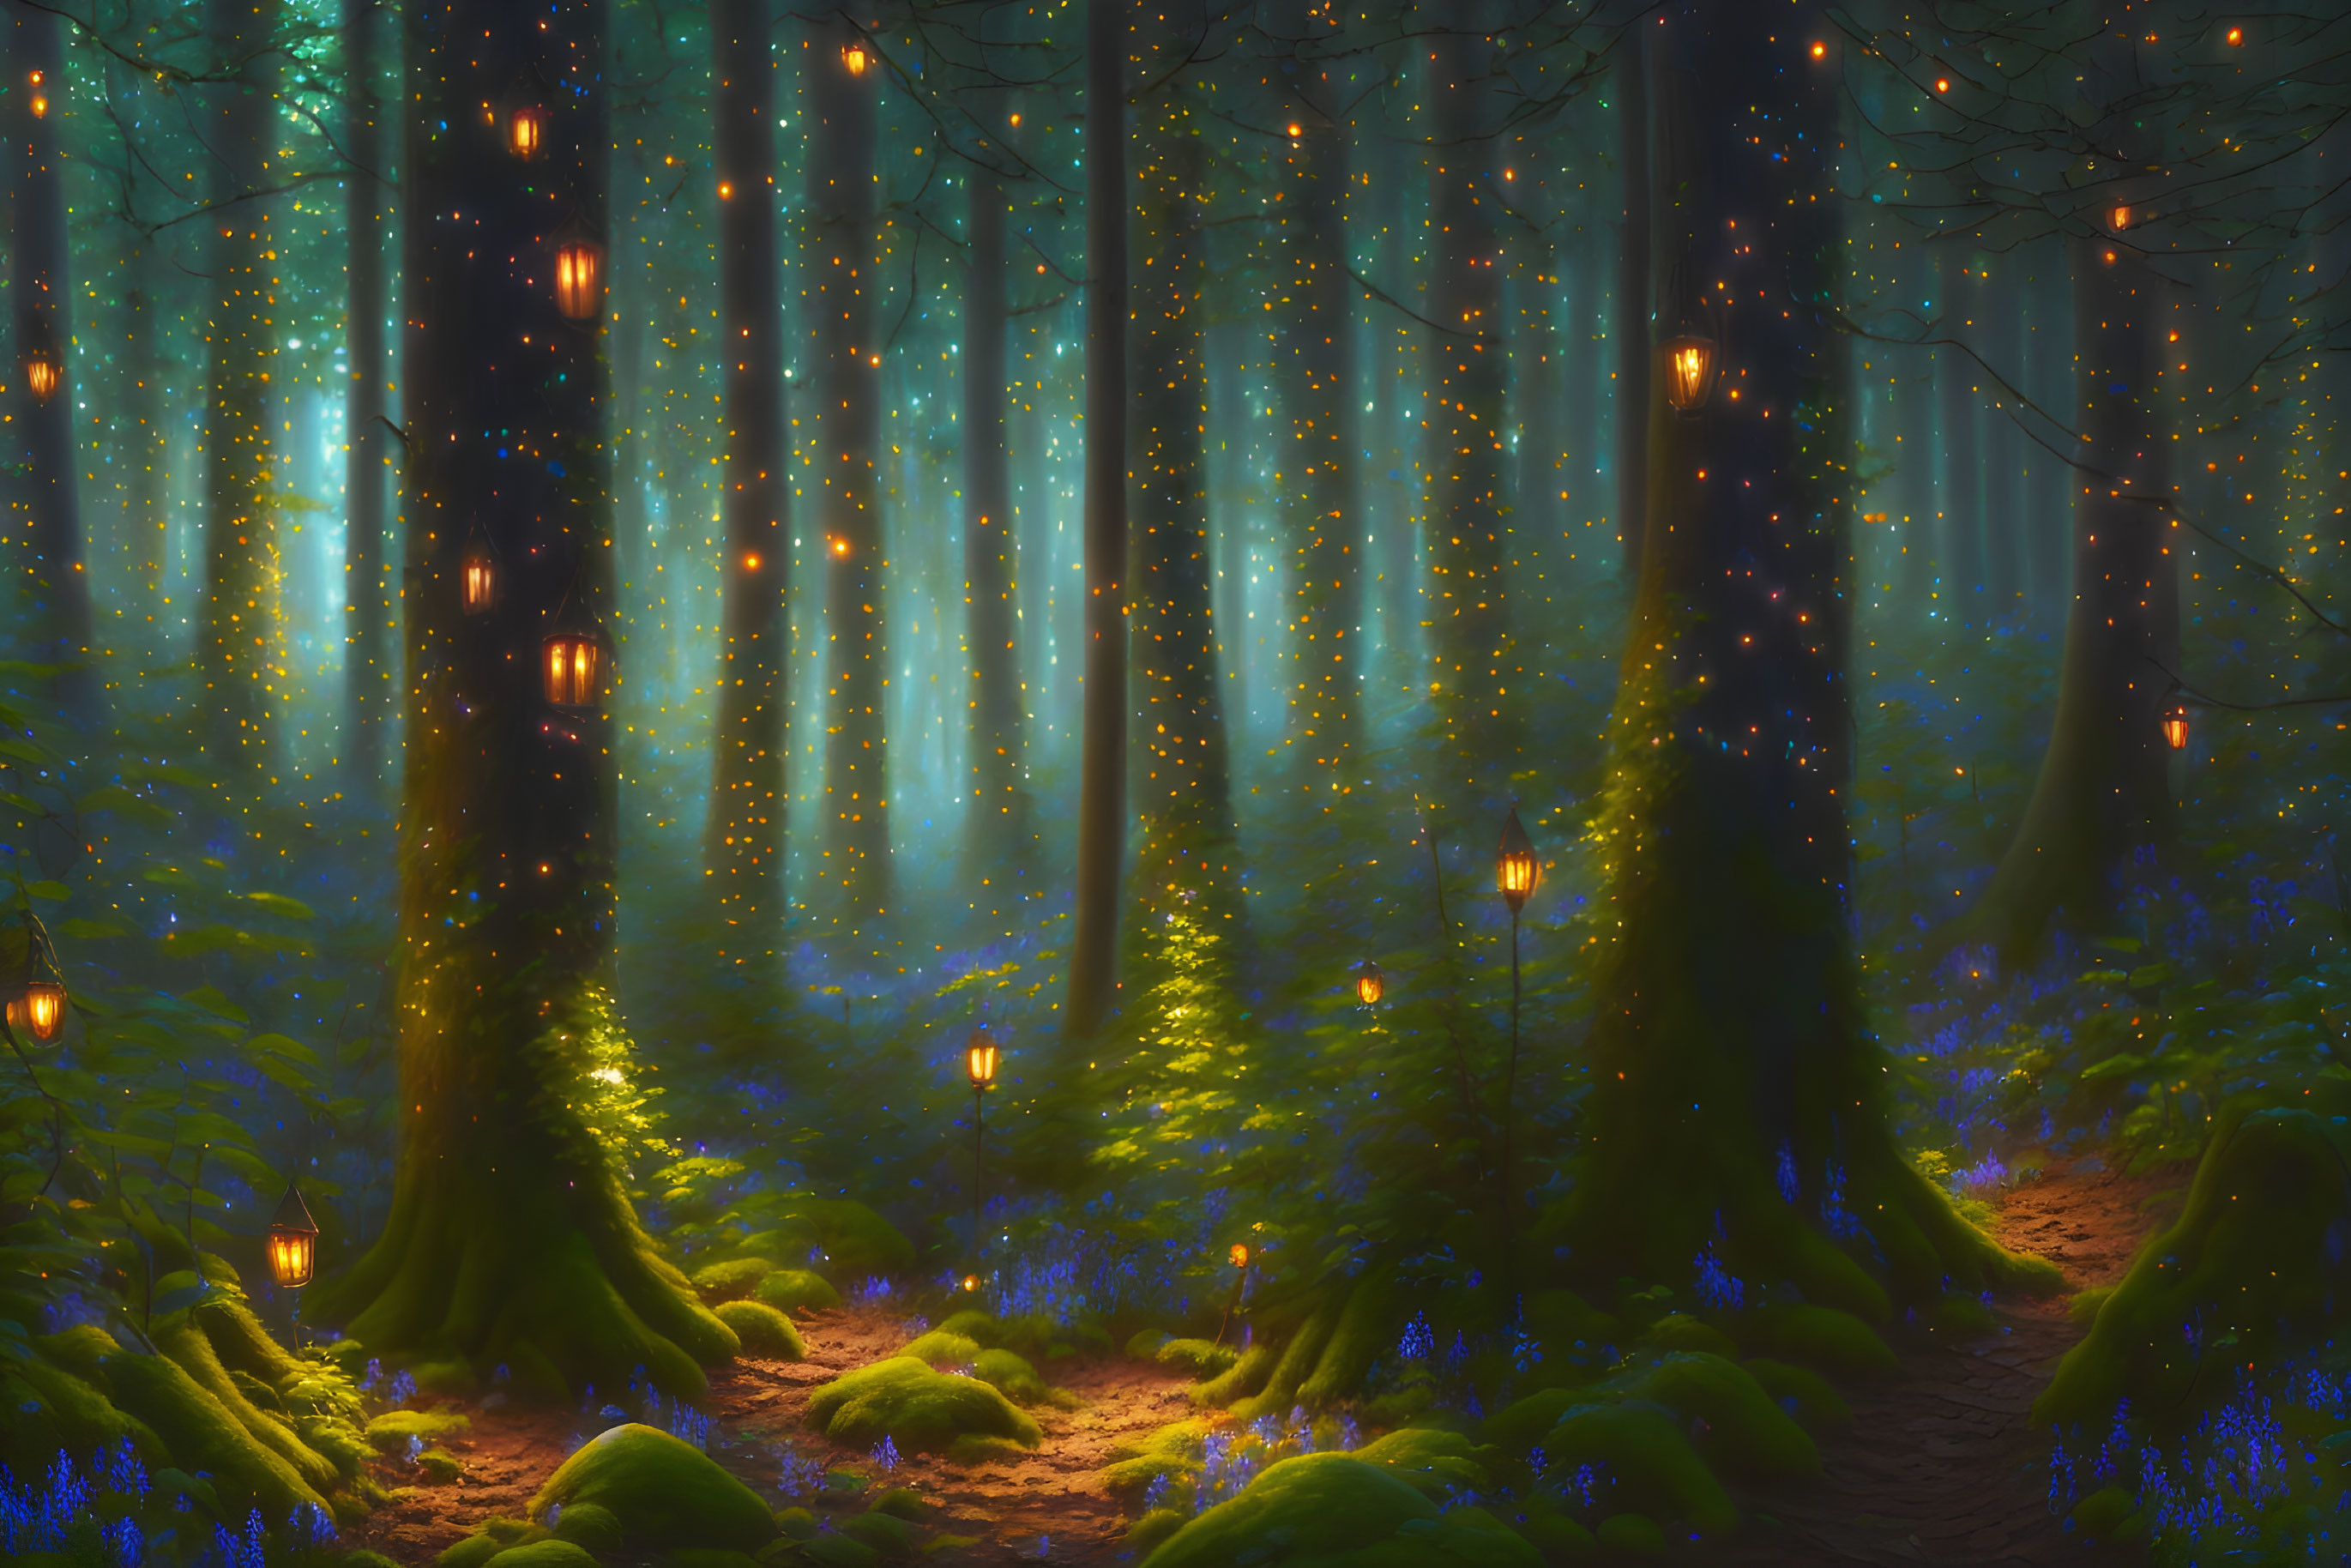 Enchanted Night Forest with Glowing Lanterns and Starry Sky